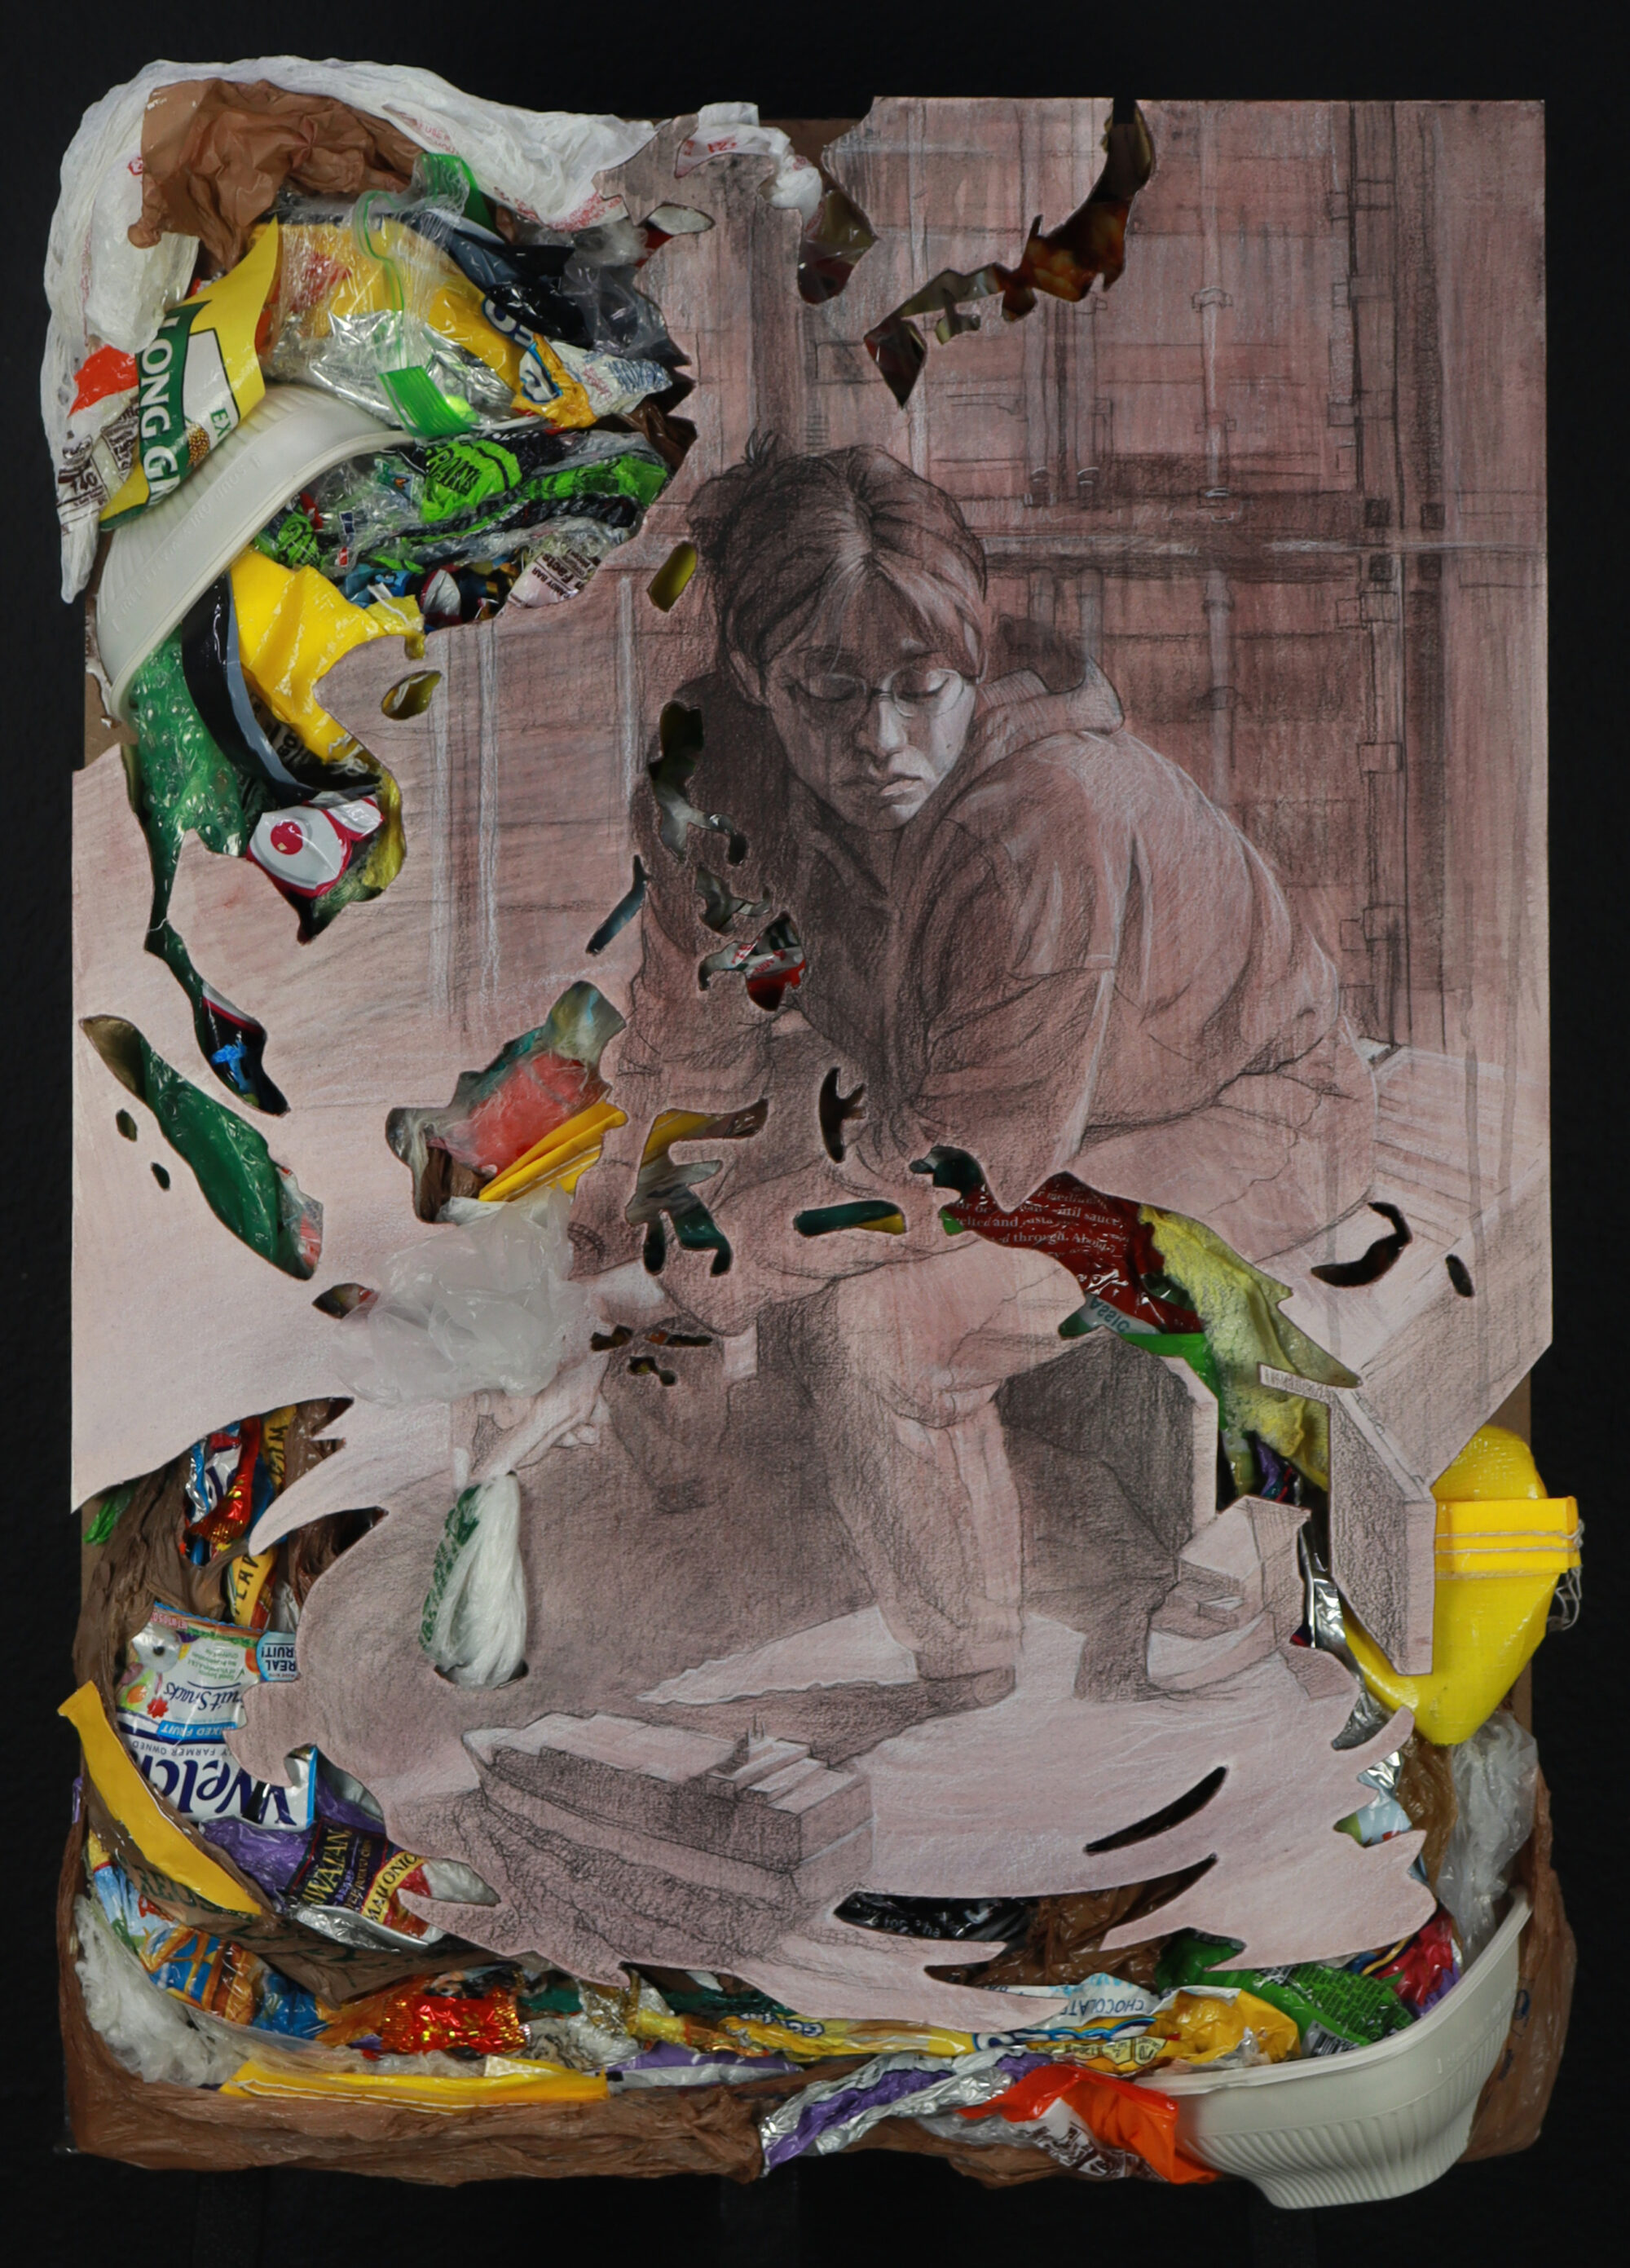 Scout Bender_WASTE SHIPPED AWAY_28 x 20 inches